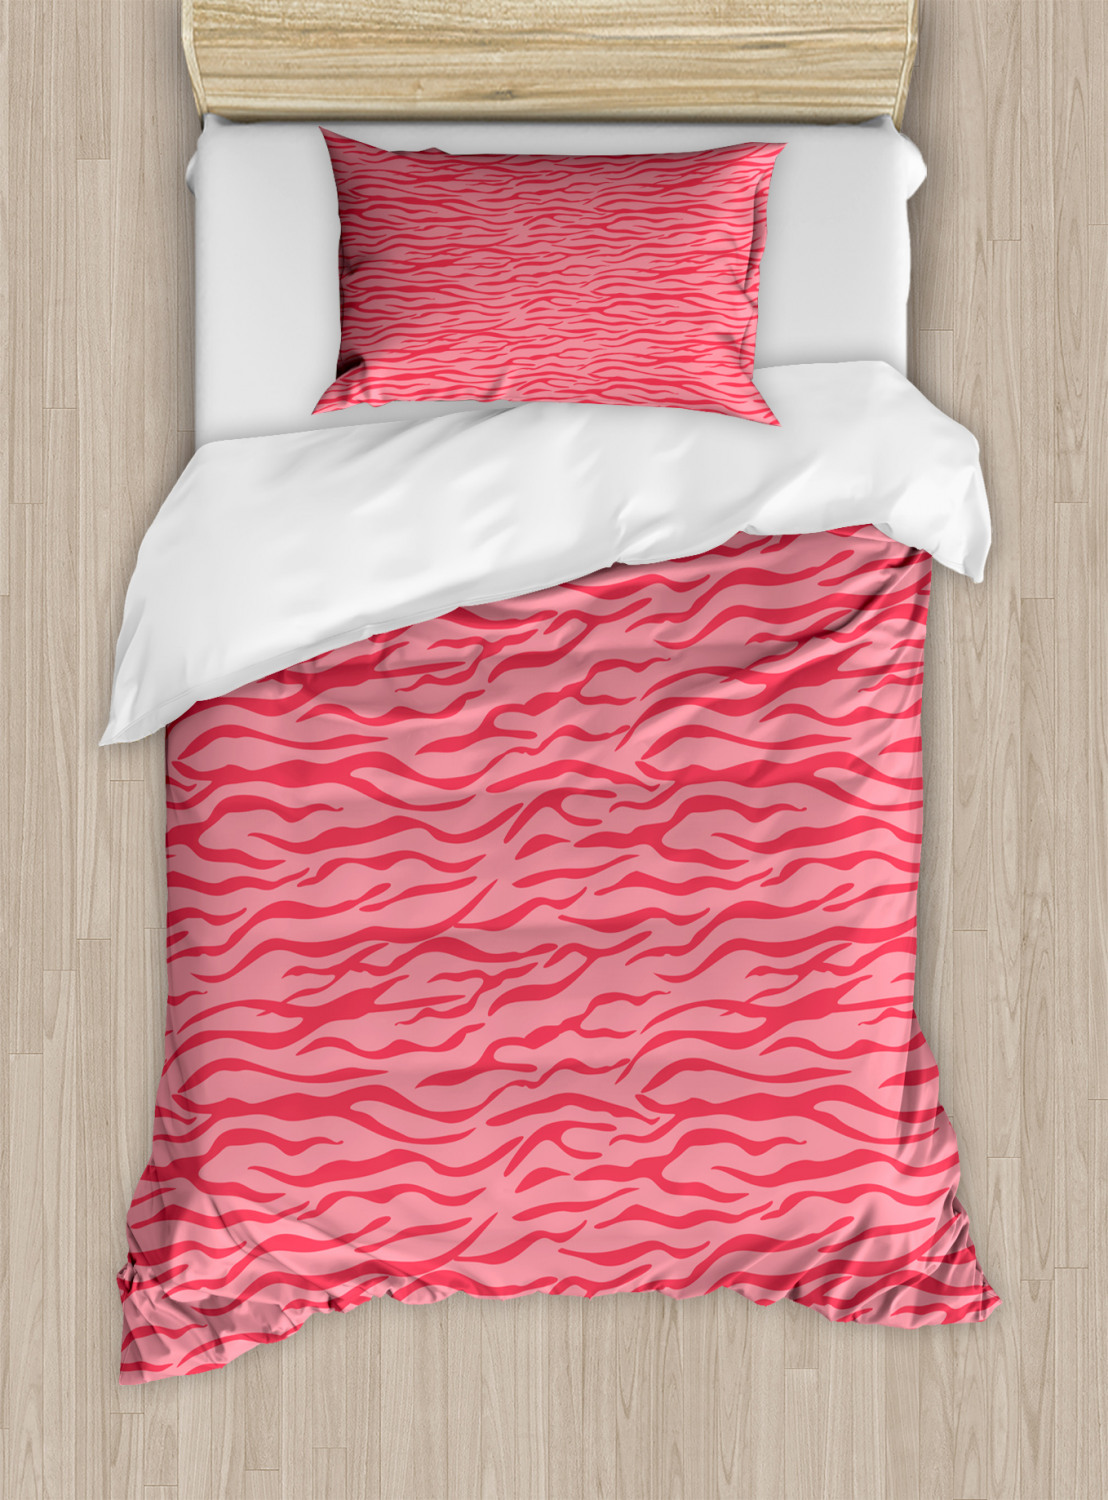 Pink Zebra Duvet Cover Set Twin Queen King Sizes With Pillow Shams